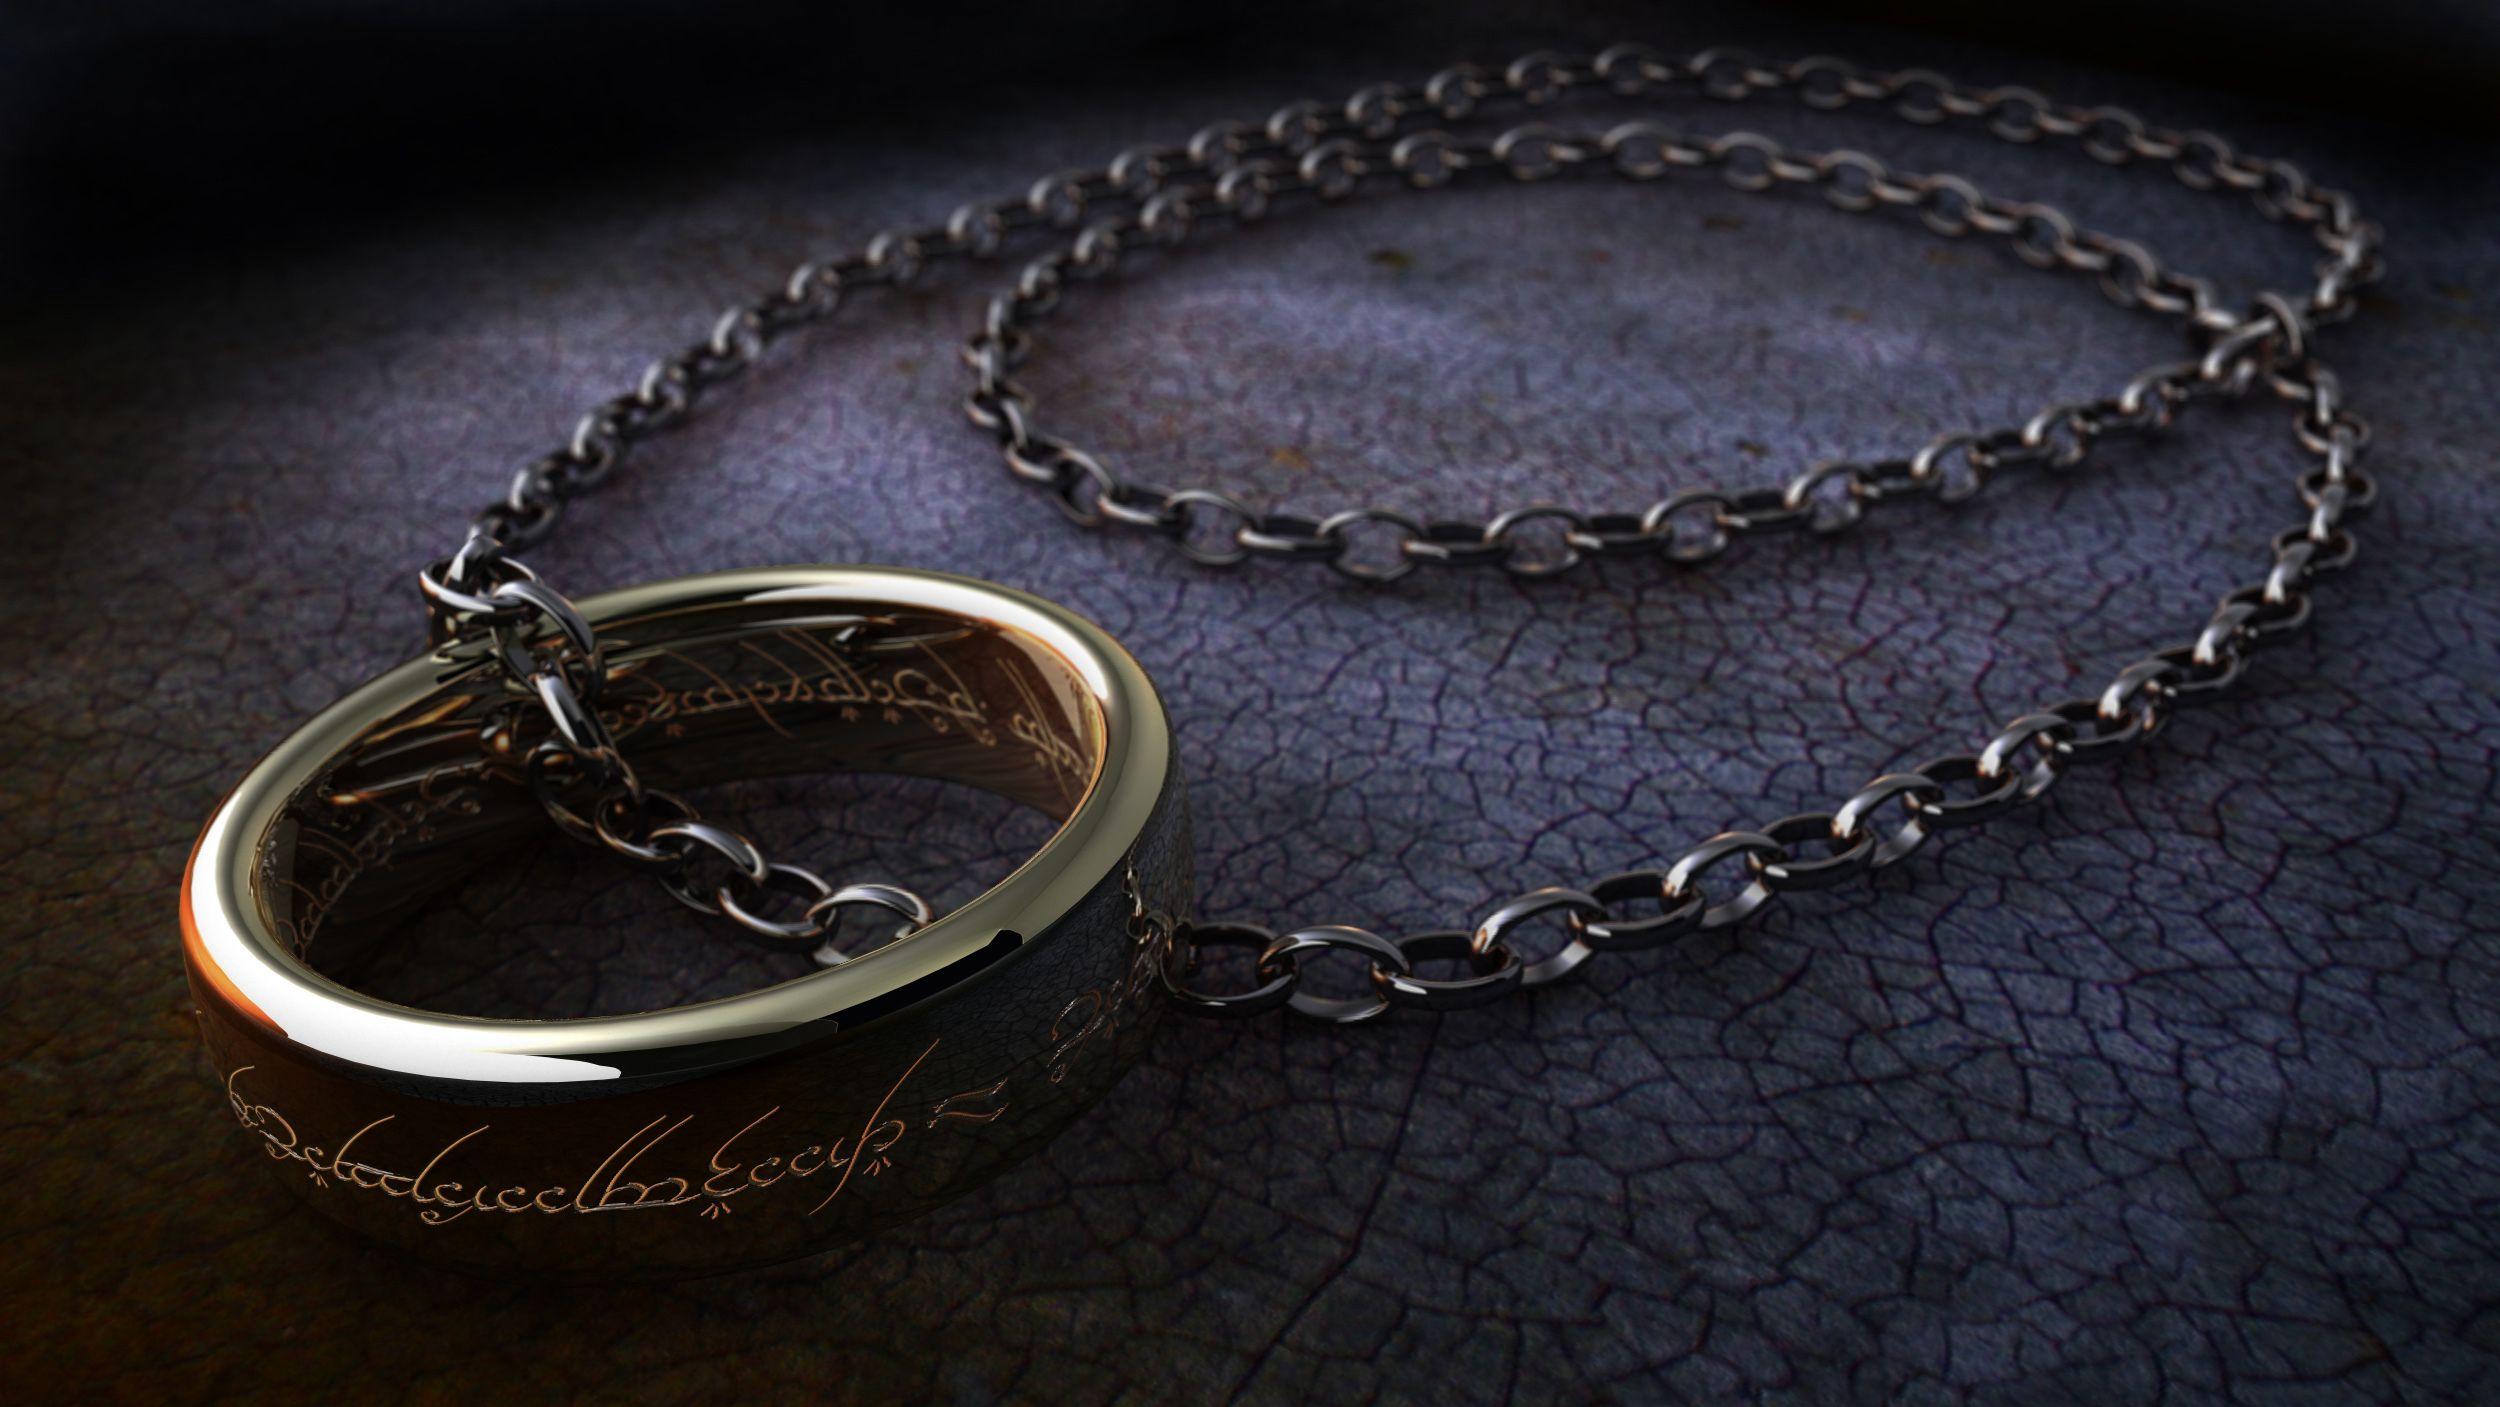 Lord Of The Rings Ring On Chain Wallpaper Desktop